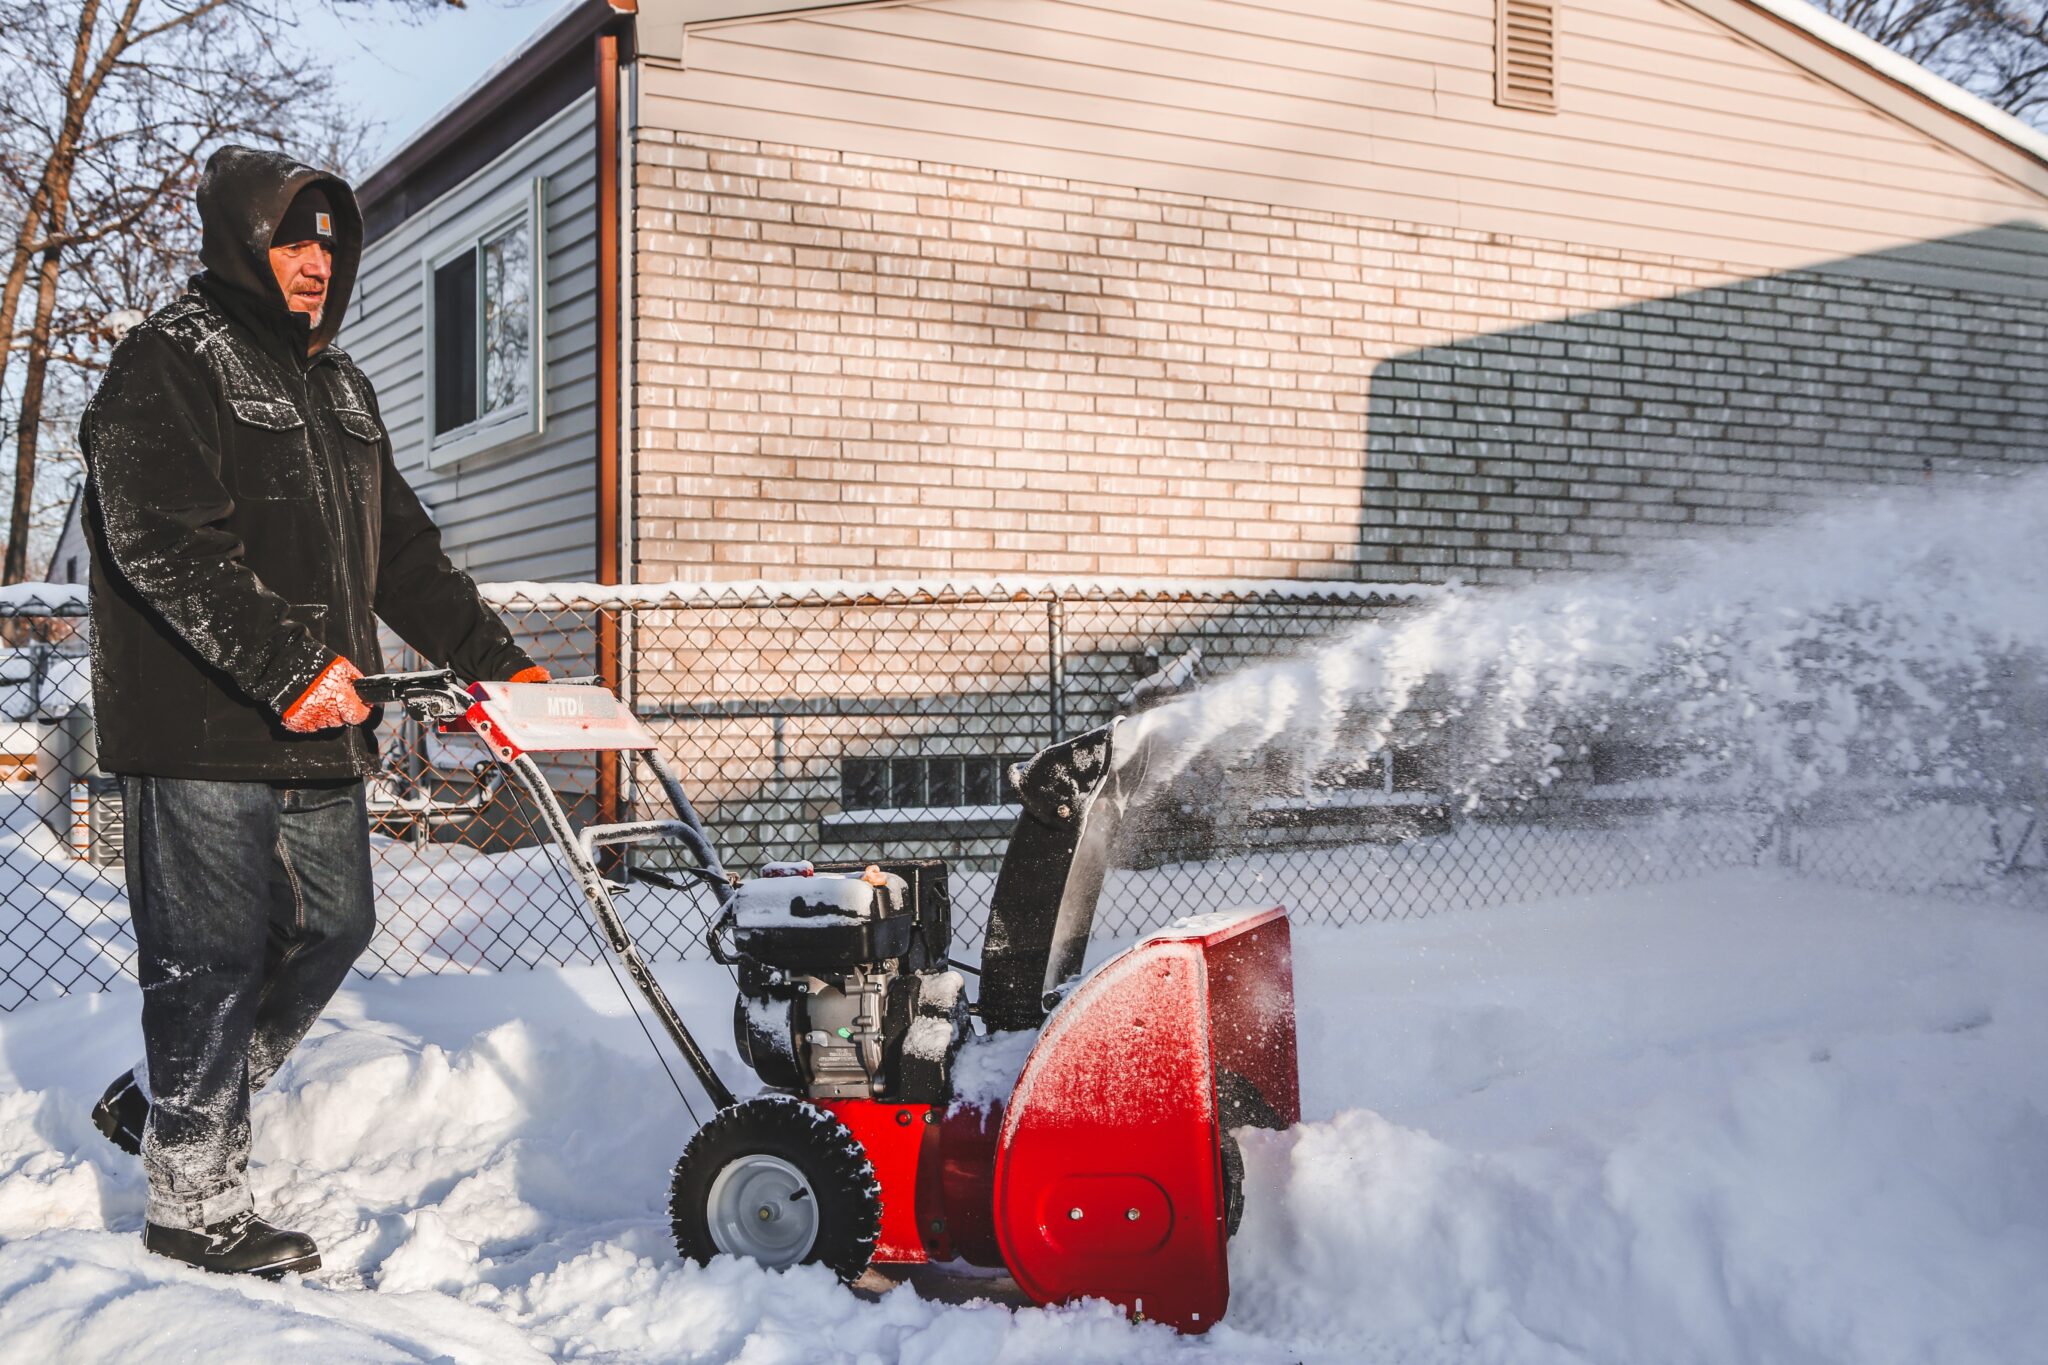 9 Best Snow Removal Tools for Home and Professional Use - Your